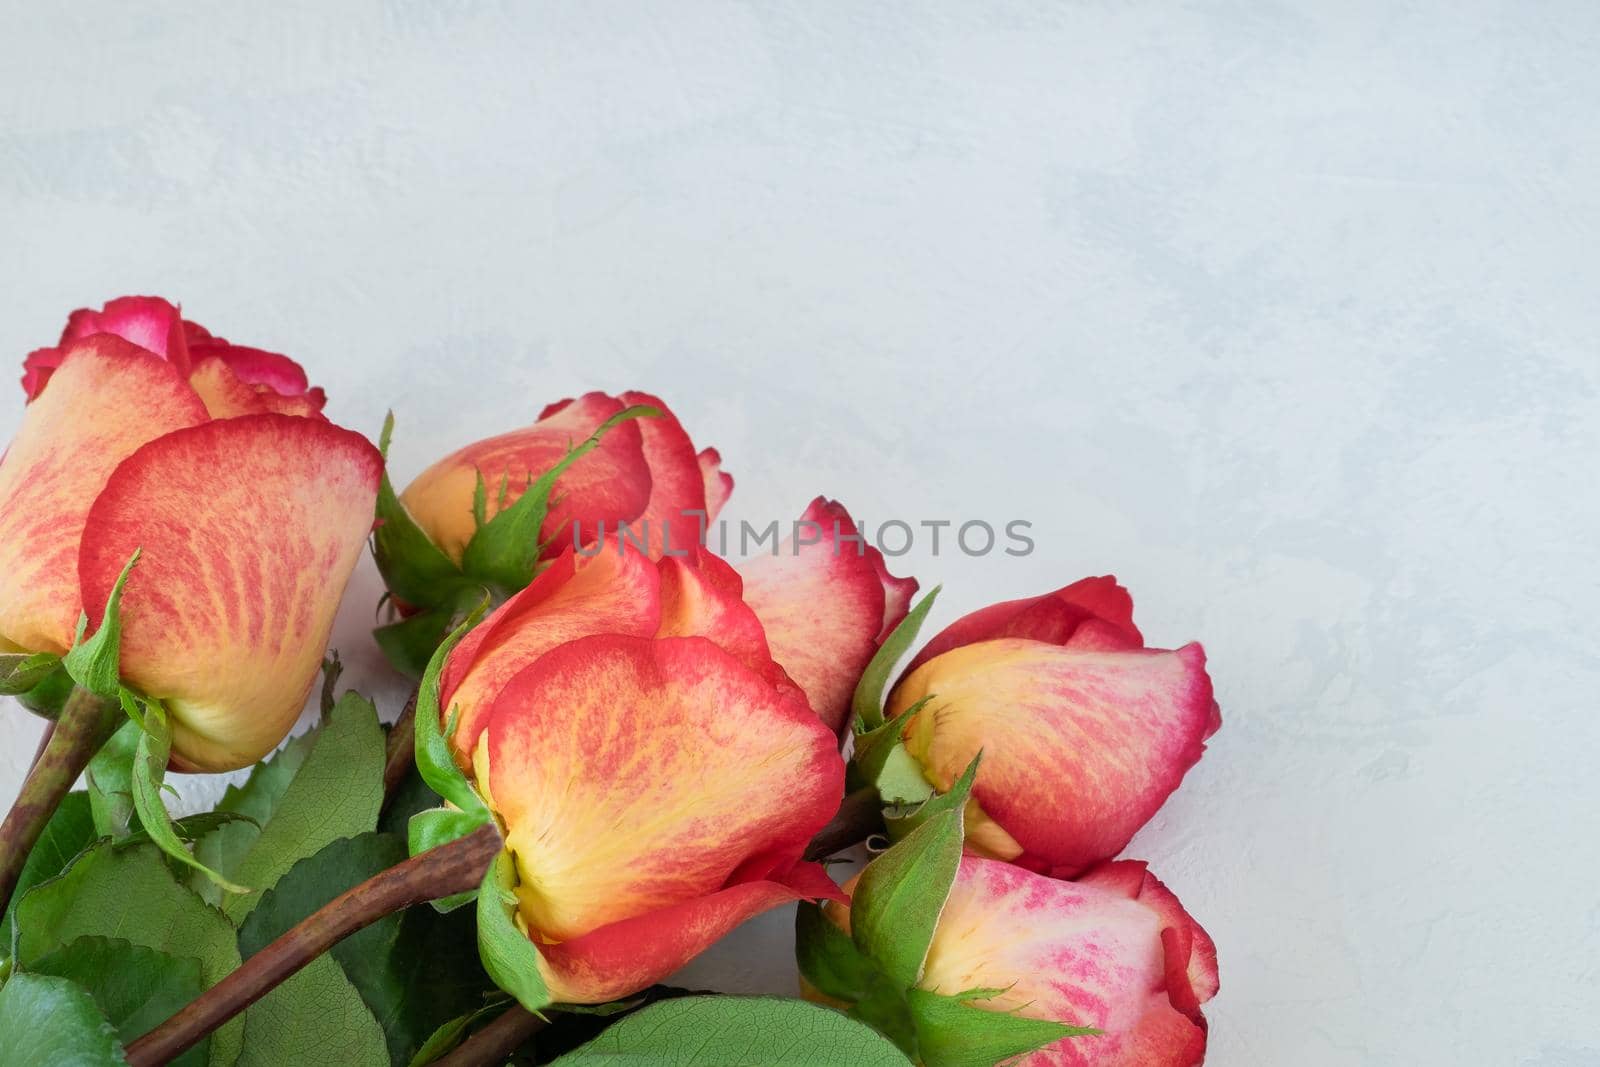 A bouquet of beautiful yellow-red roses lies on a light background with the texture of plaster. Congratulations, gift concept. Horizontal orientation, selective focus.